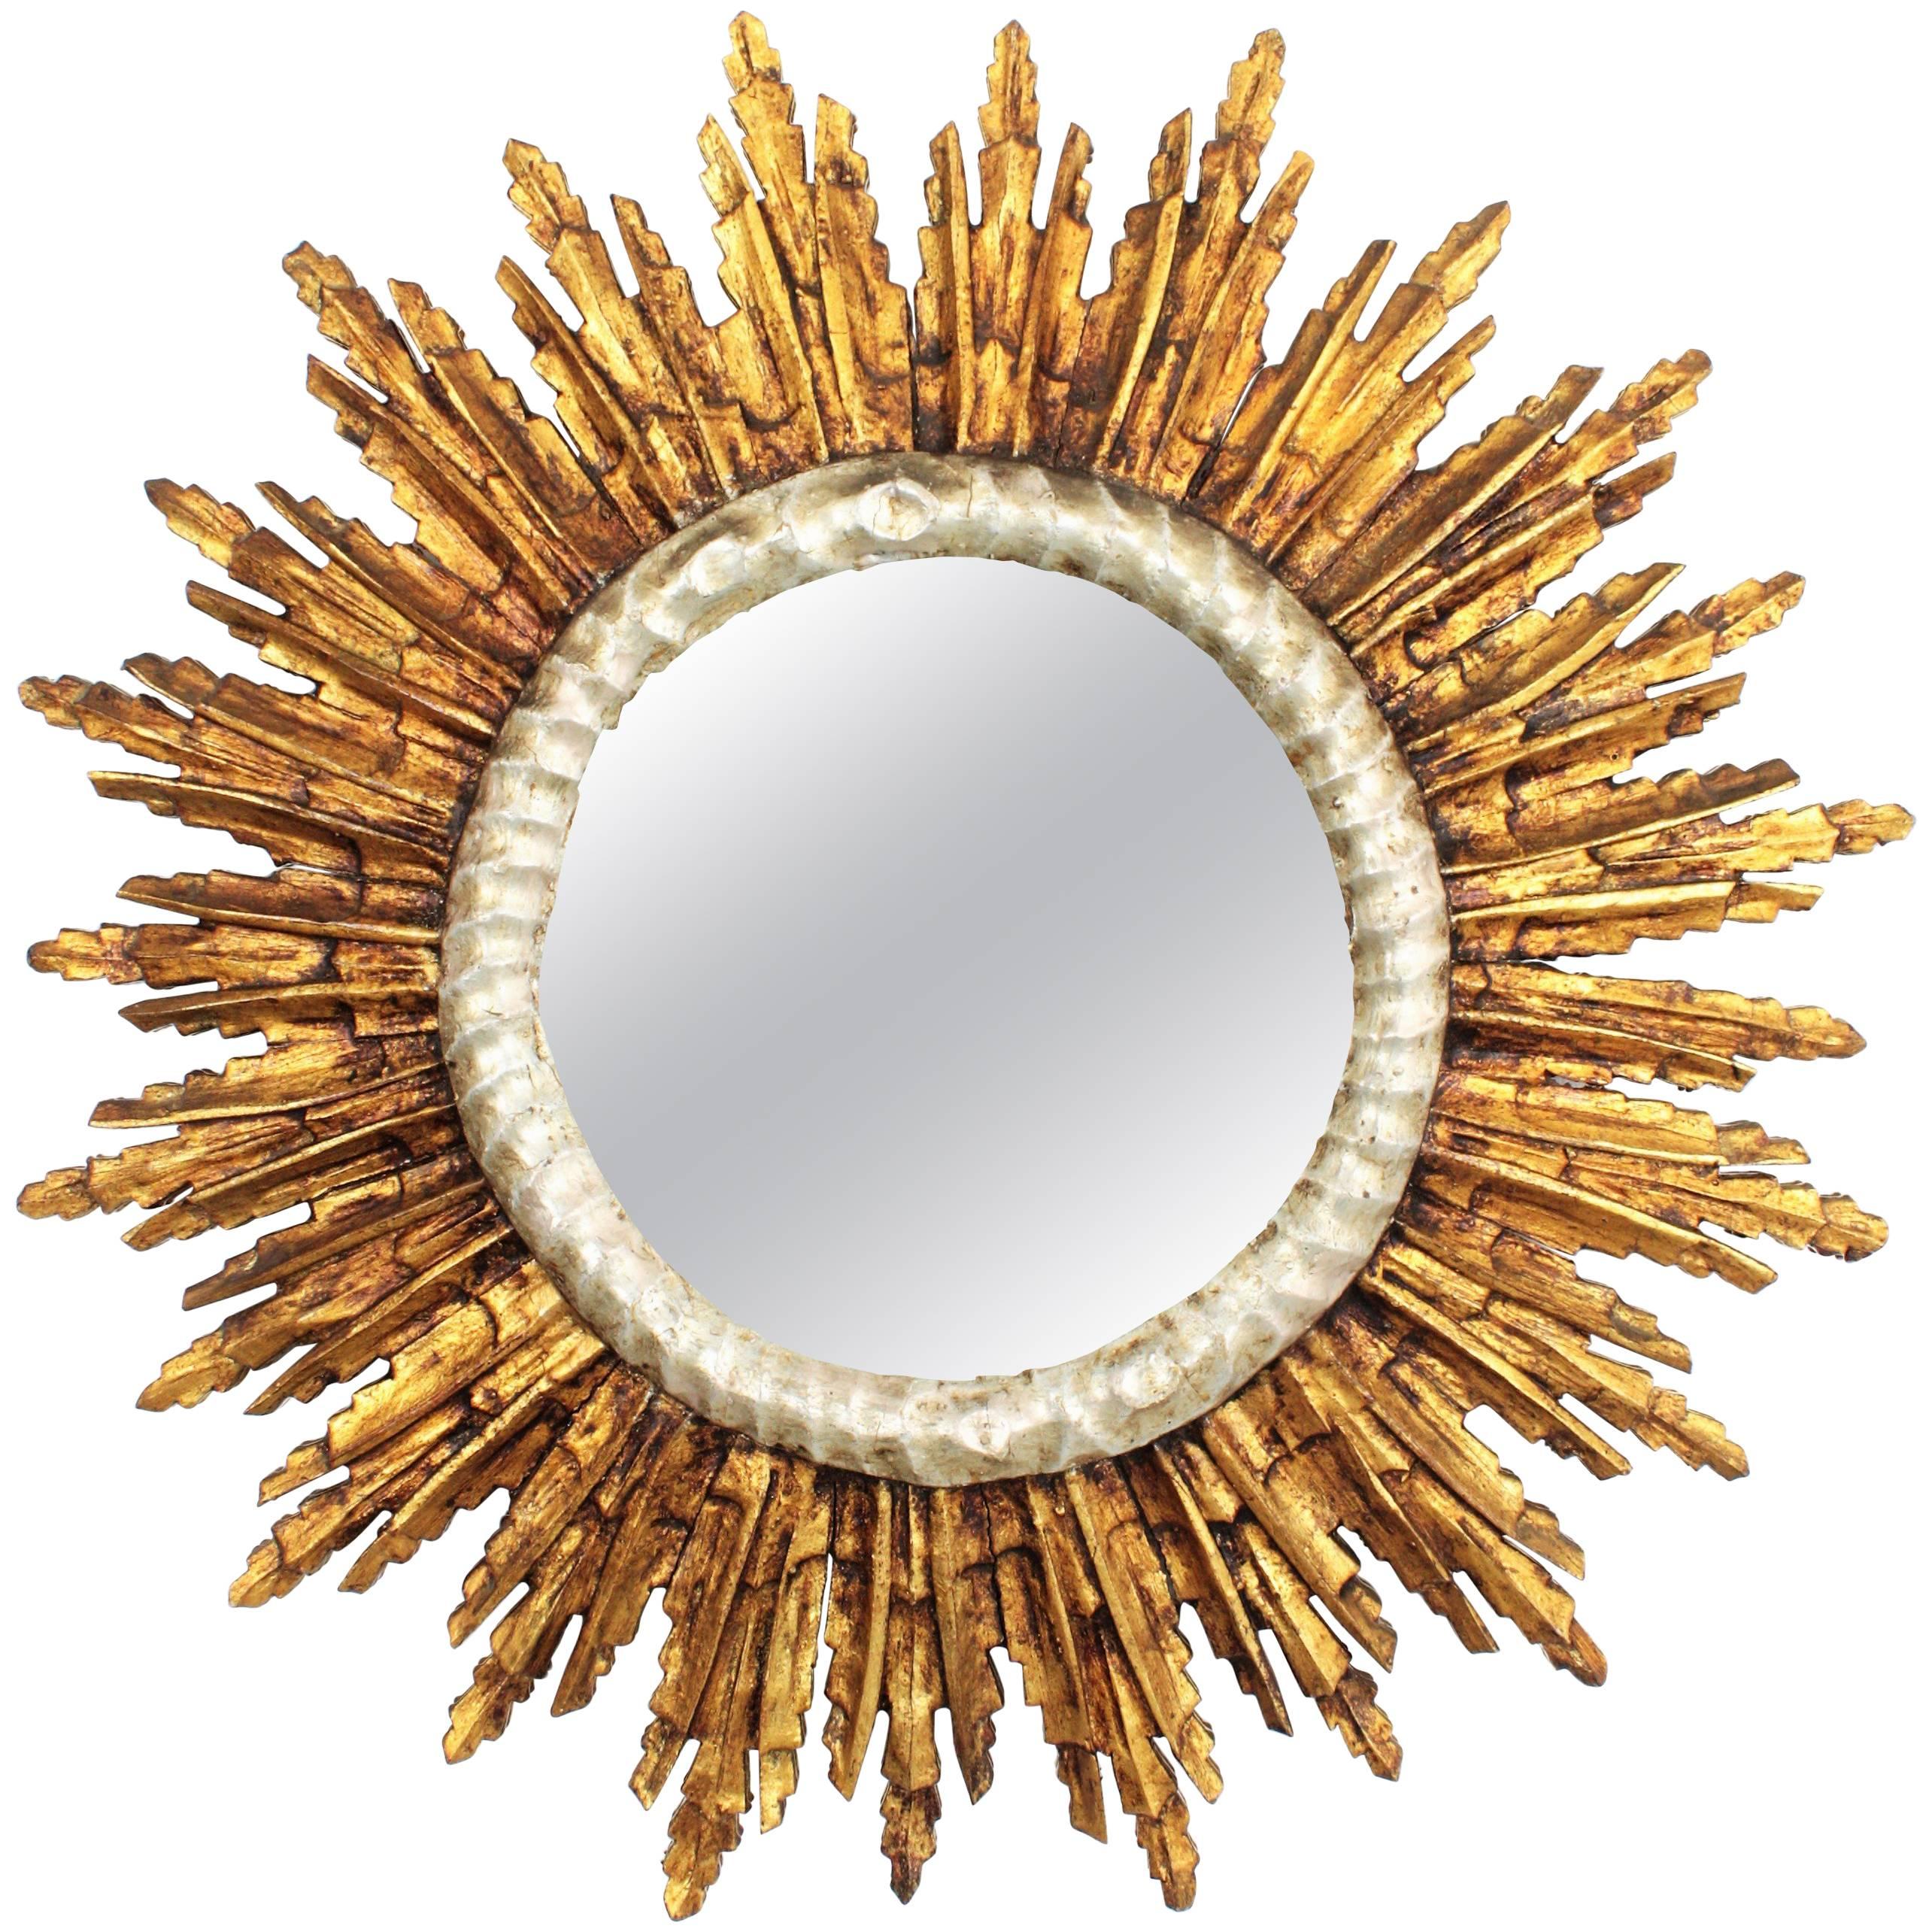 Magnificent hand carved wood mirror in Baroque style with silver leaf finish surrounding the glass and gold leaf finish at the frame. France, 1930s.
The mirror has a gorgeous patina and it is in excellent condition, 
Overall diameter: 70